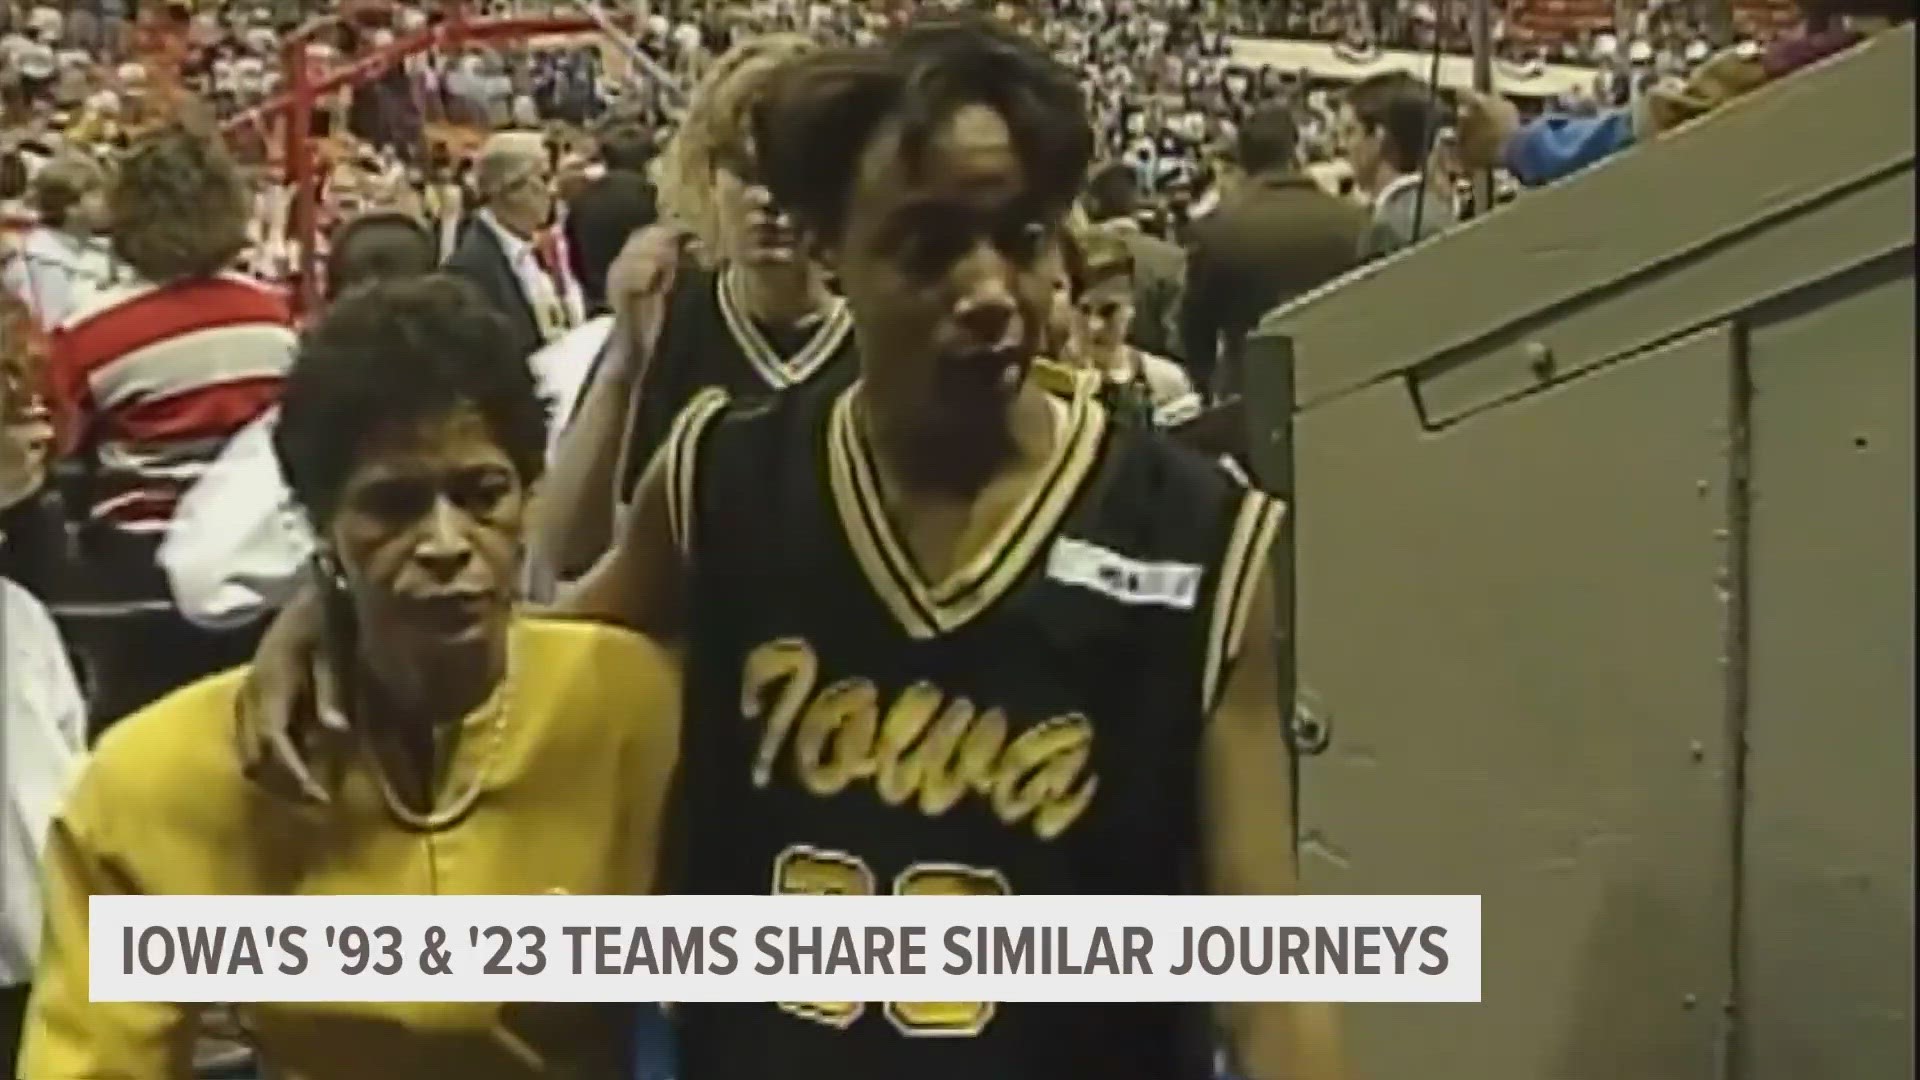 It's been 30 years, but the Iowa Hawkeyes women's basketball team will once again be part of the Final Four showdown in the NCAA tournament.